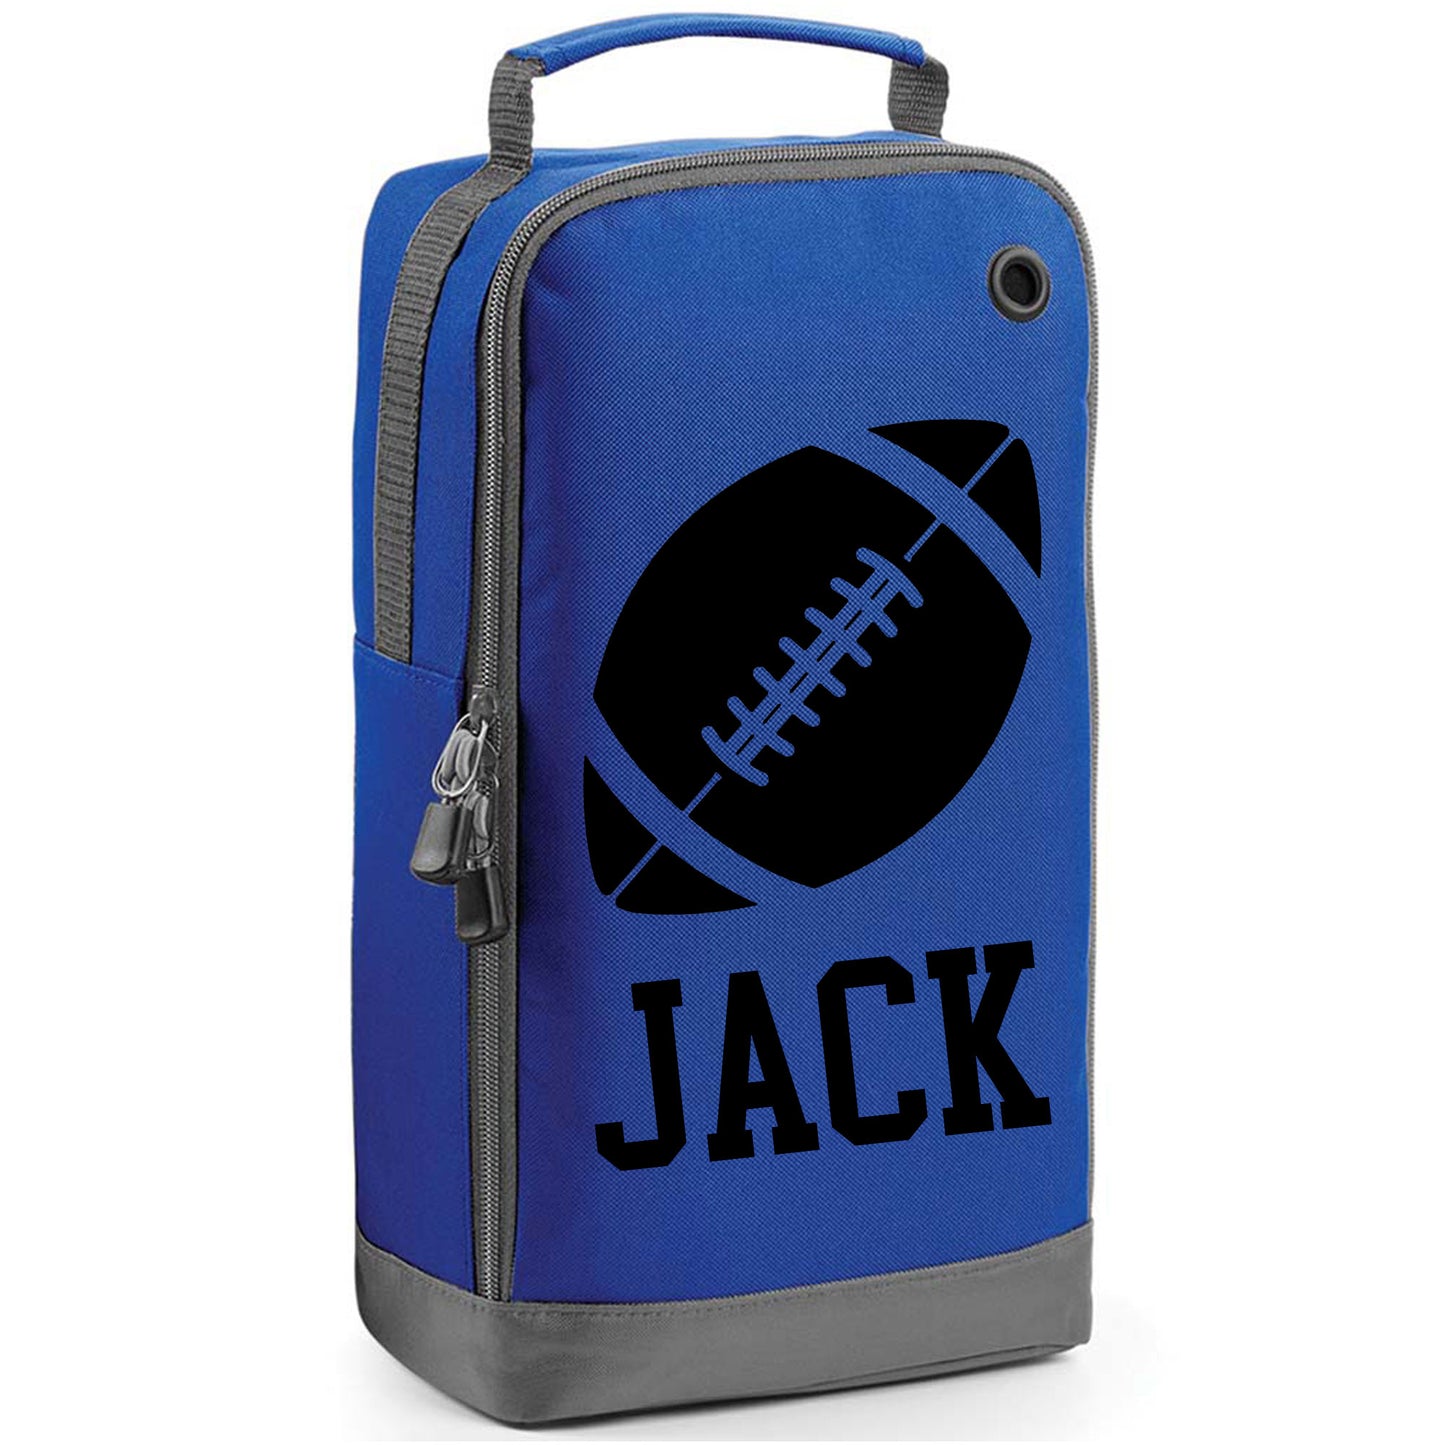 Personalised Rugby/ American Football Boot Bag with Design & Name  - Always Looking Good - Royal Blue  